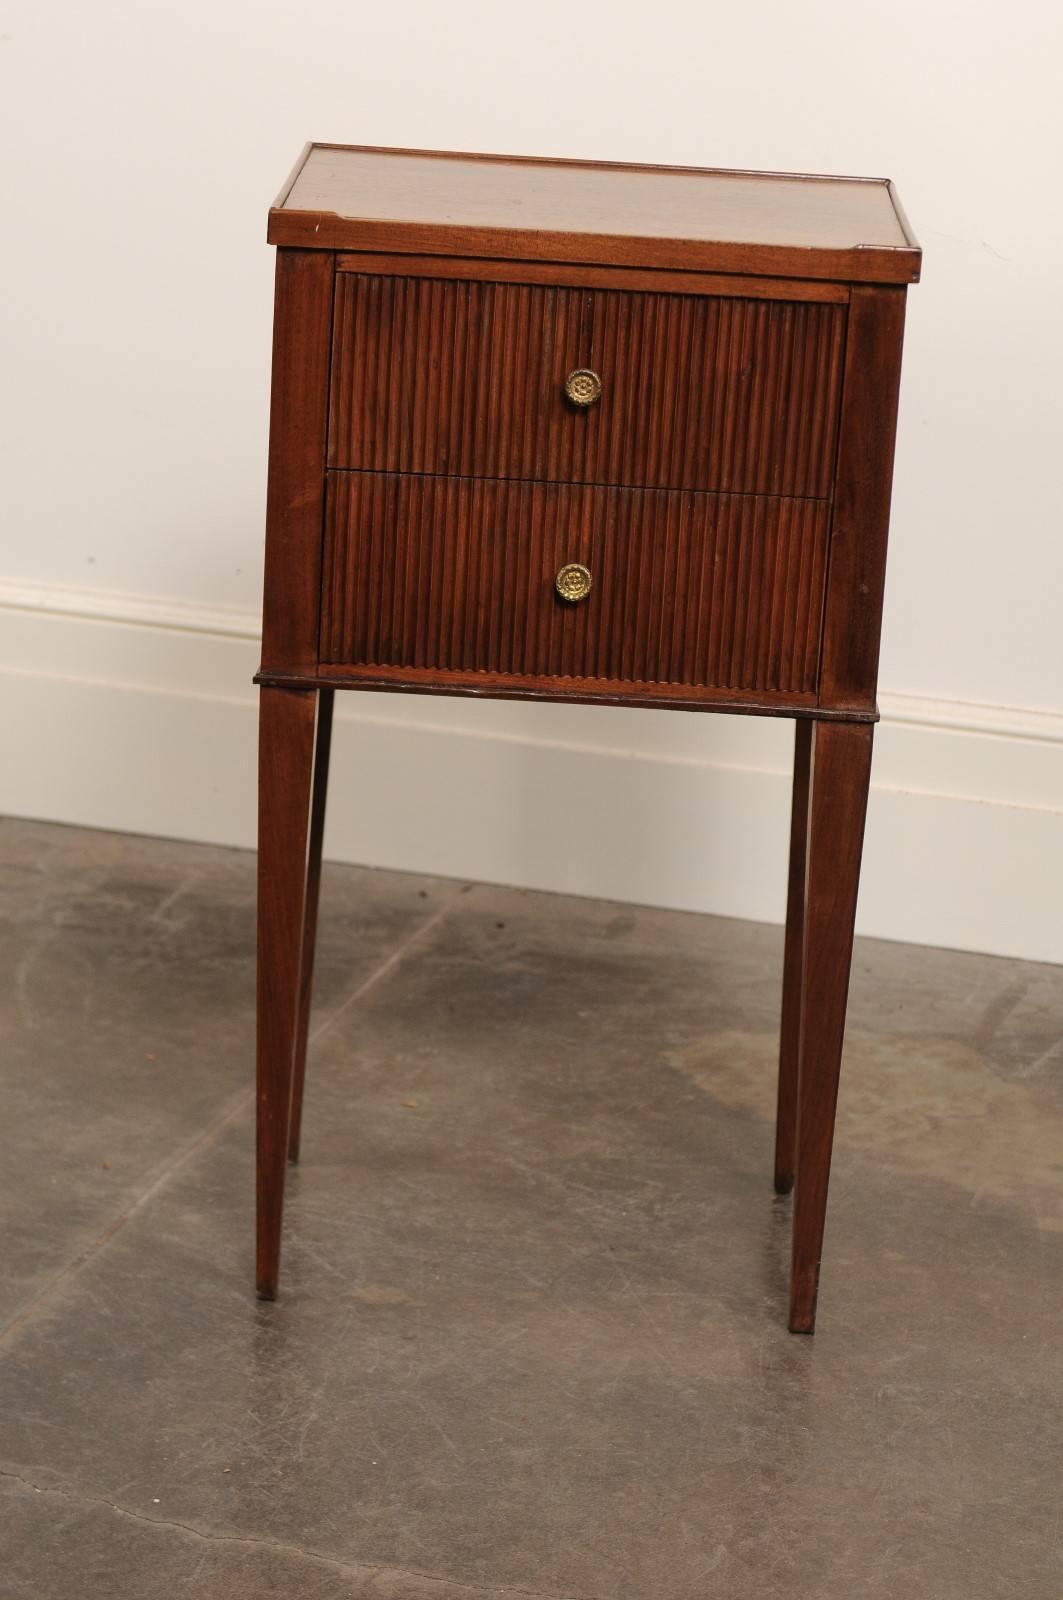 French Mahogany Turn of the Century Side Table with Two Drawers and Tapered Legs 4